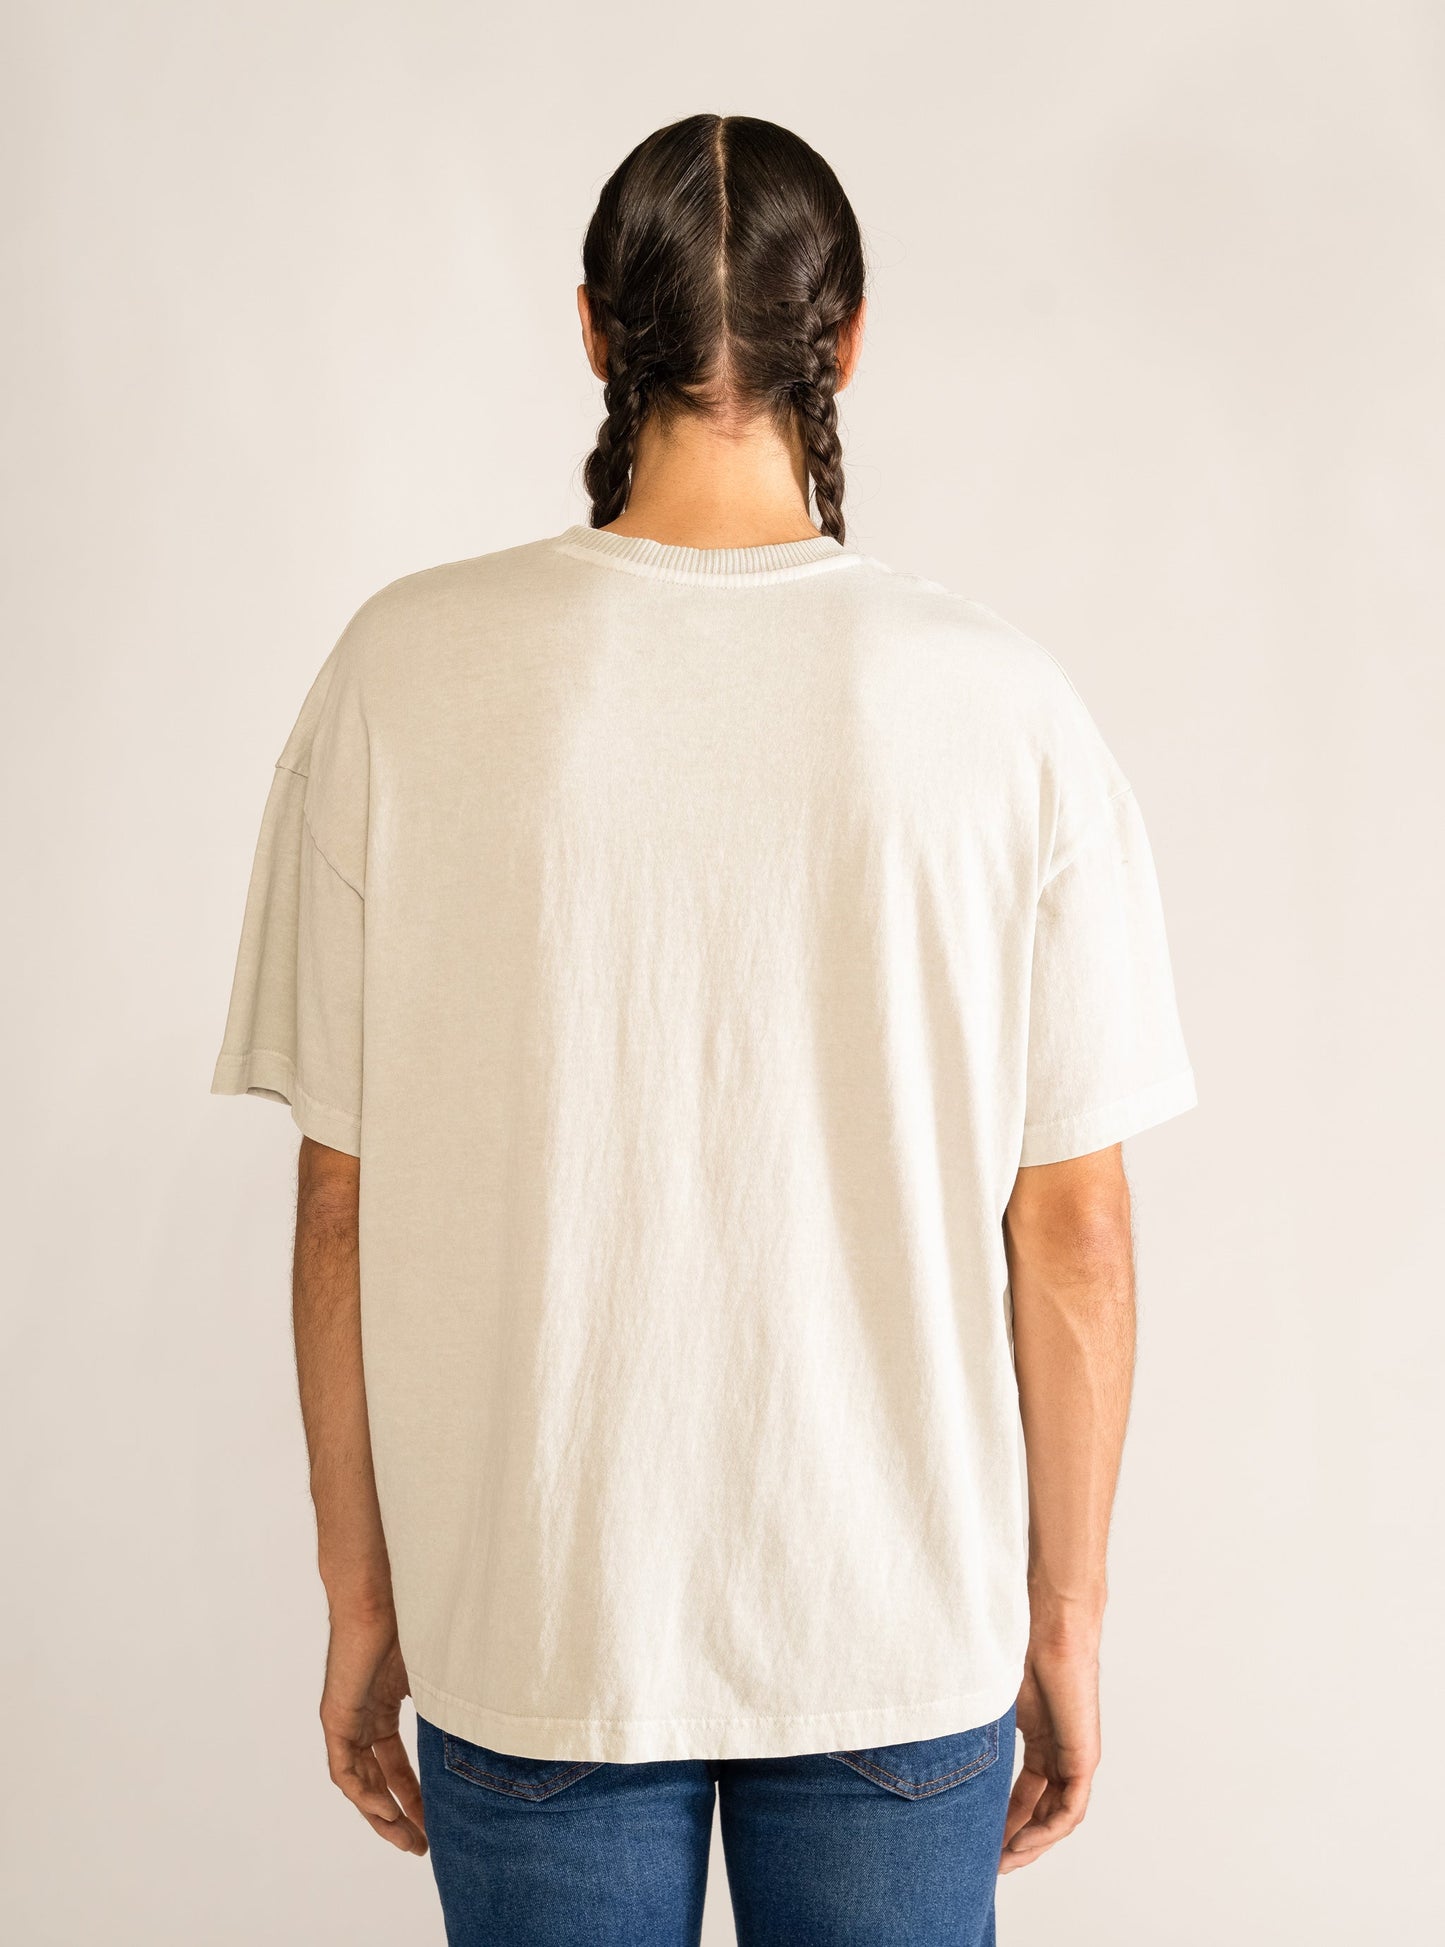 Who Made Who Oversize T-shirt, Verde Claro